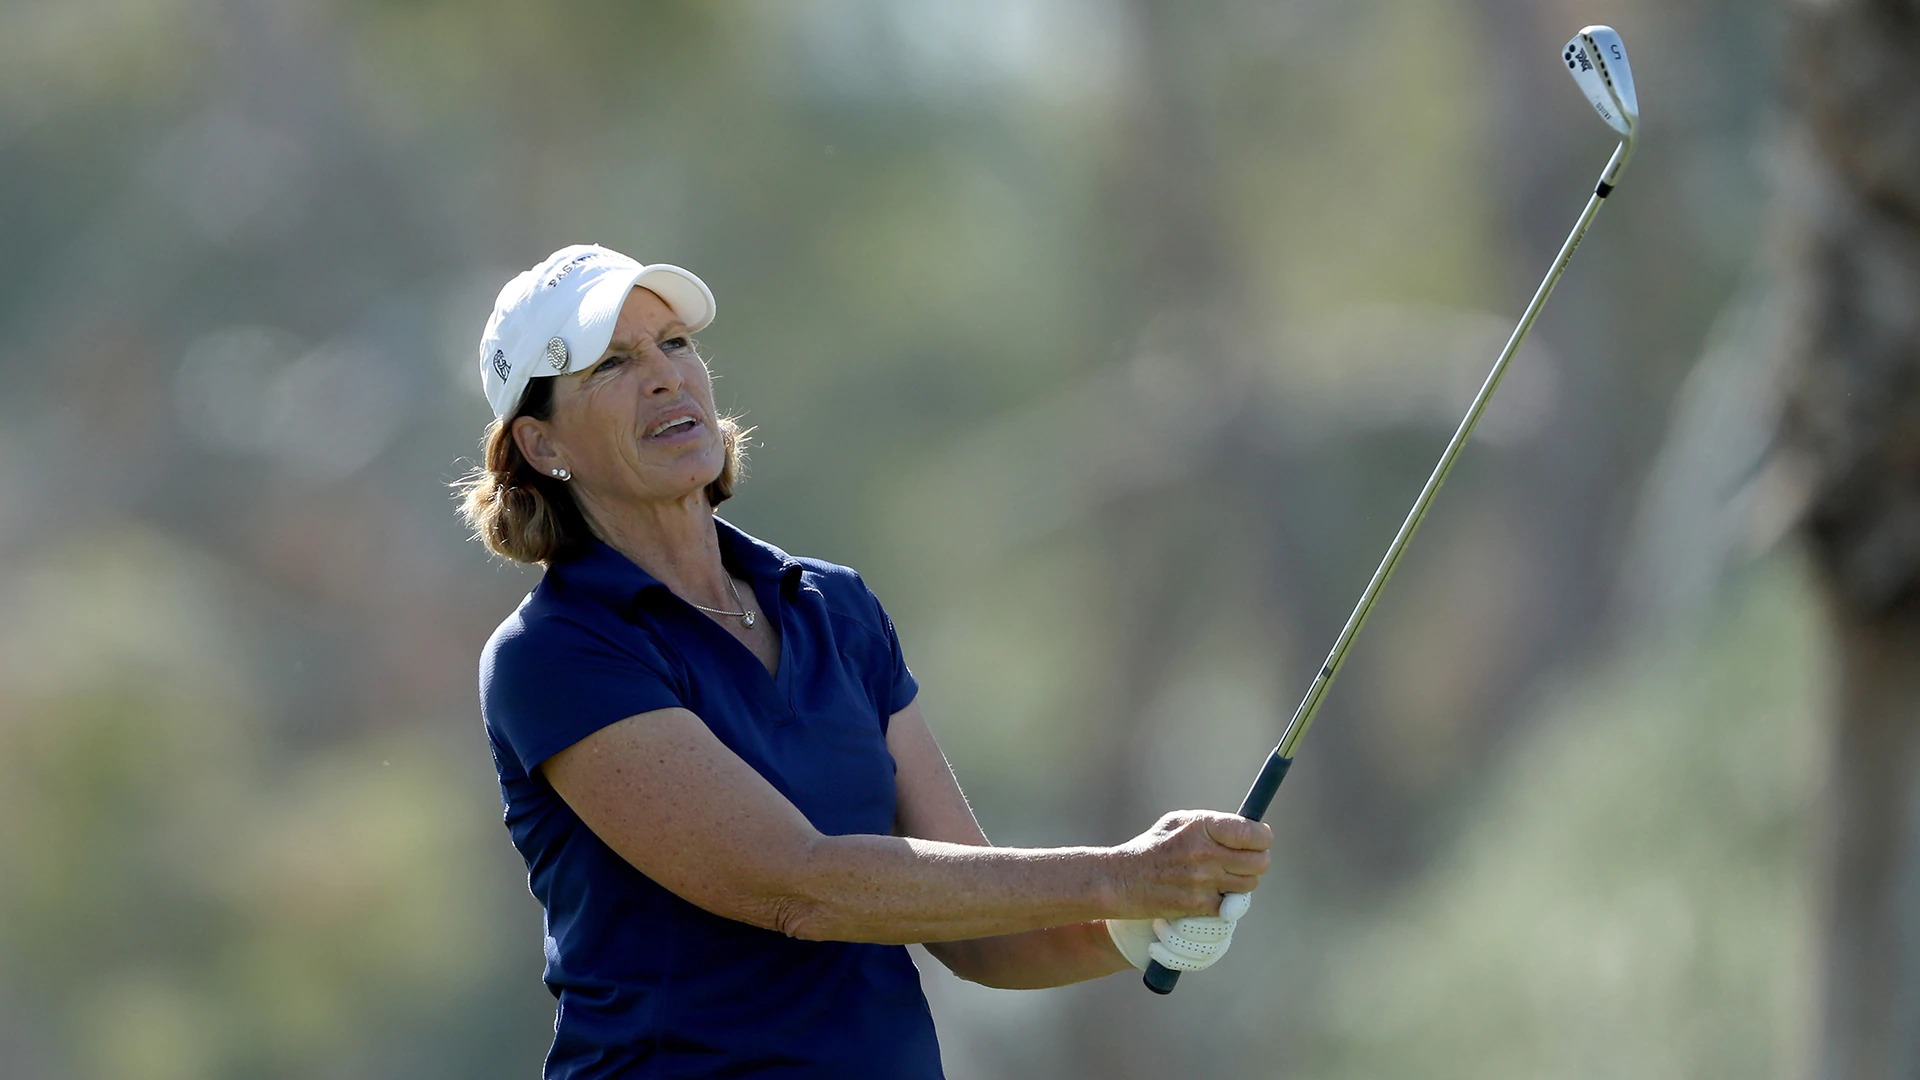 Inkster quietly closes out her final ANA, as she winds down her major career